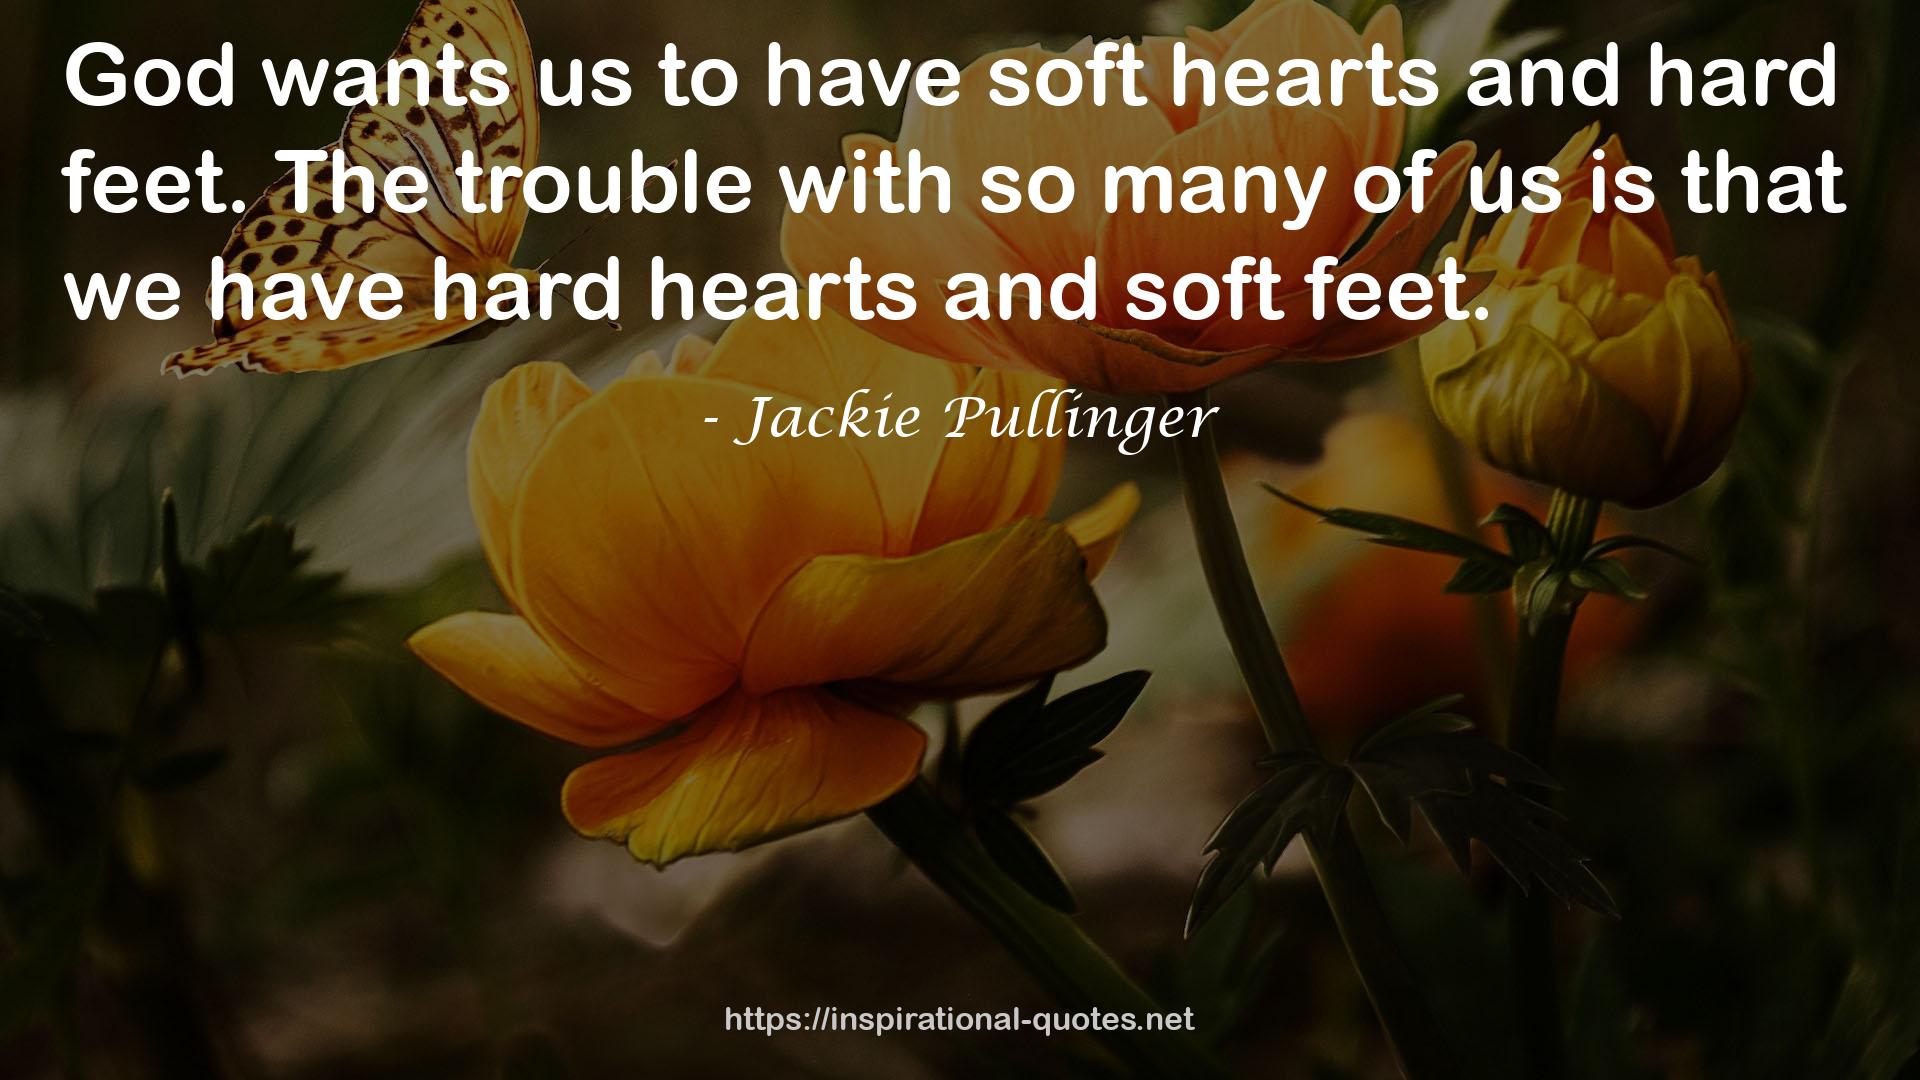 Jackie Pullinger QUOTES